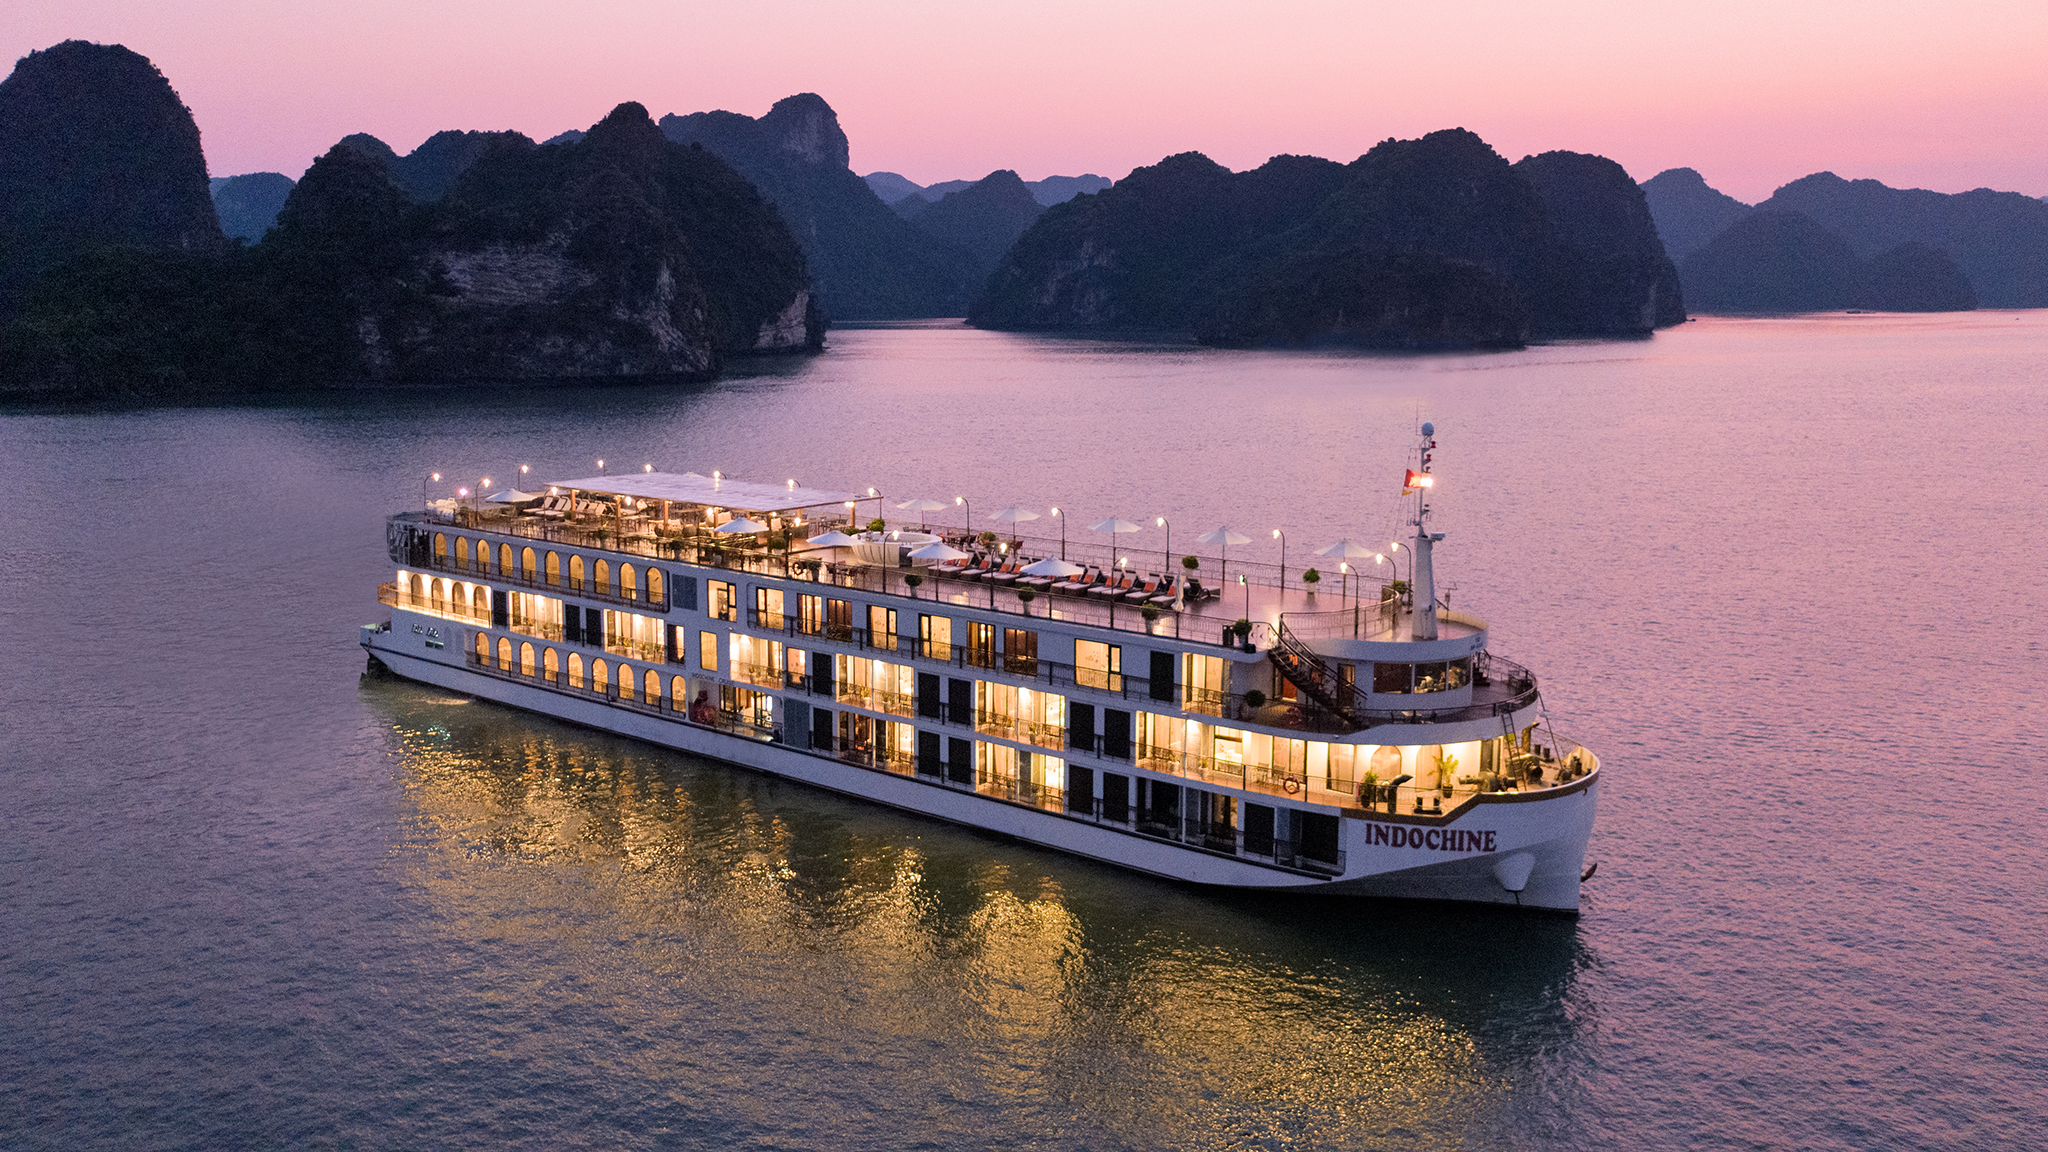 Indochine Cruise in the dusk